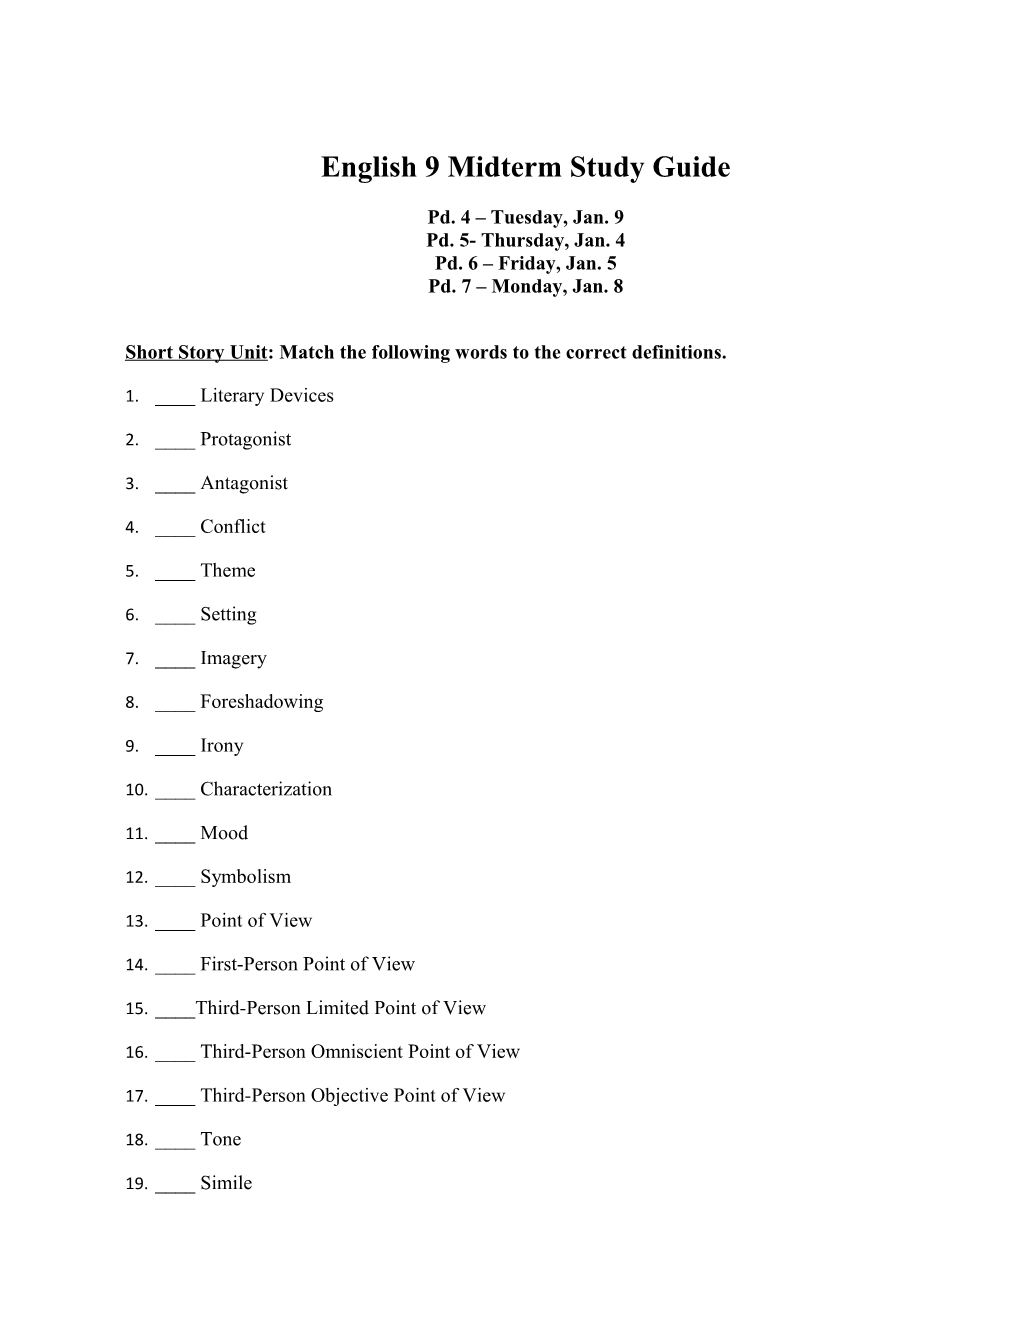 English 9 Midterm Study Guide